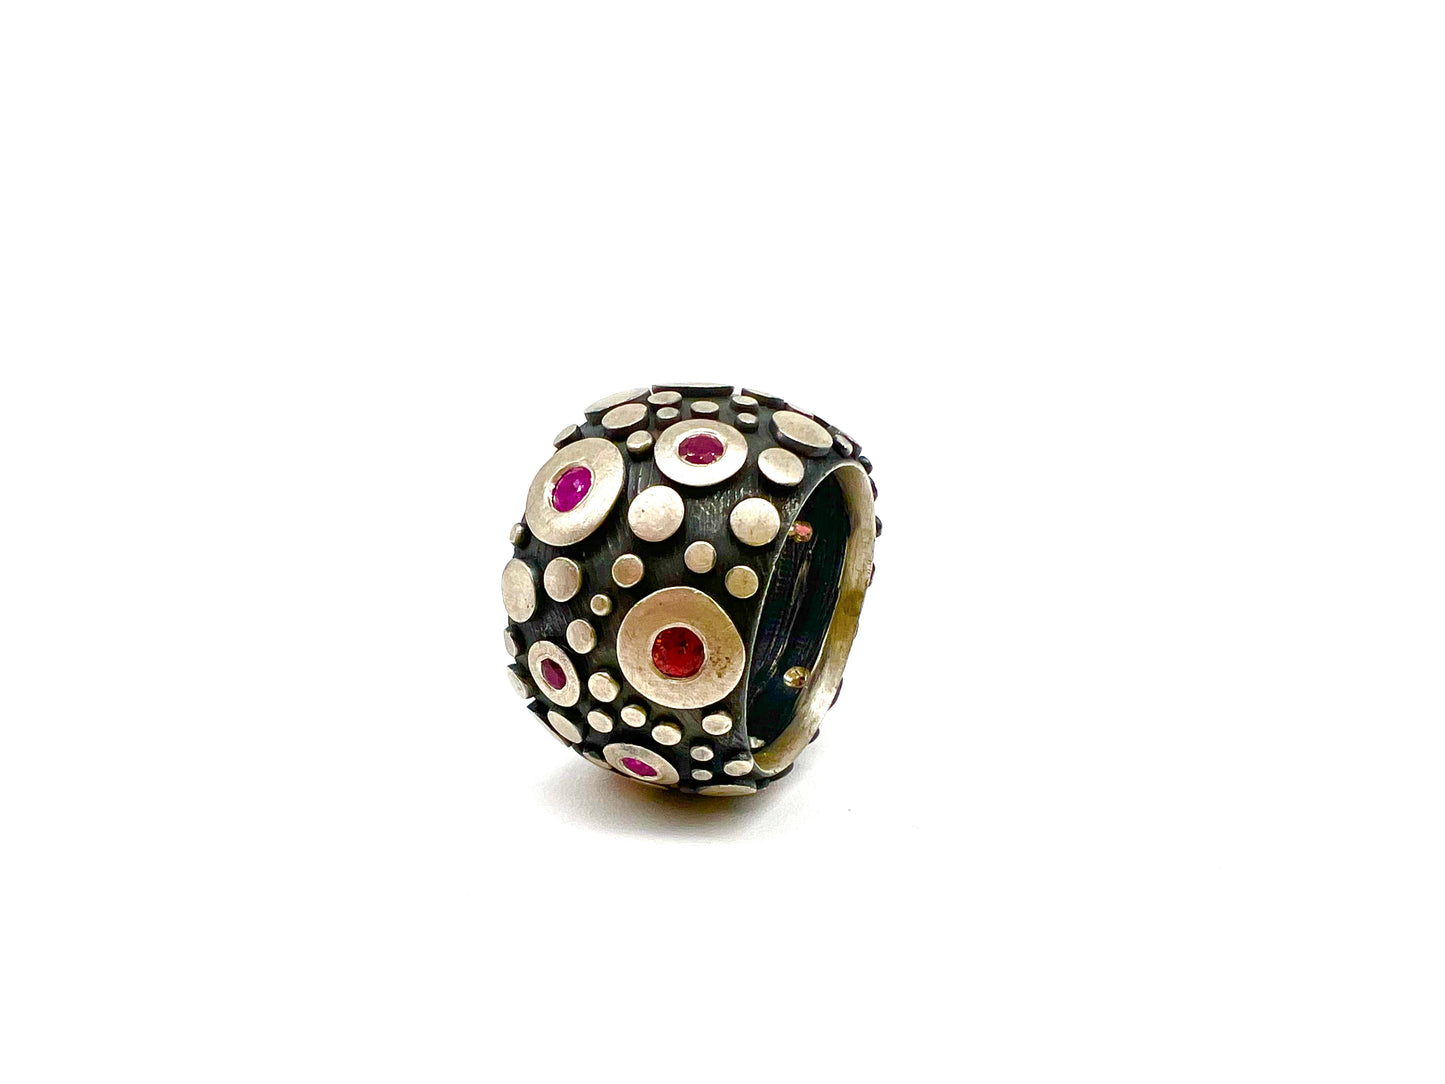 Oxidized Sterling Silver Ring with Red, Hot Pink and Orange Sapphires